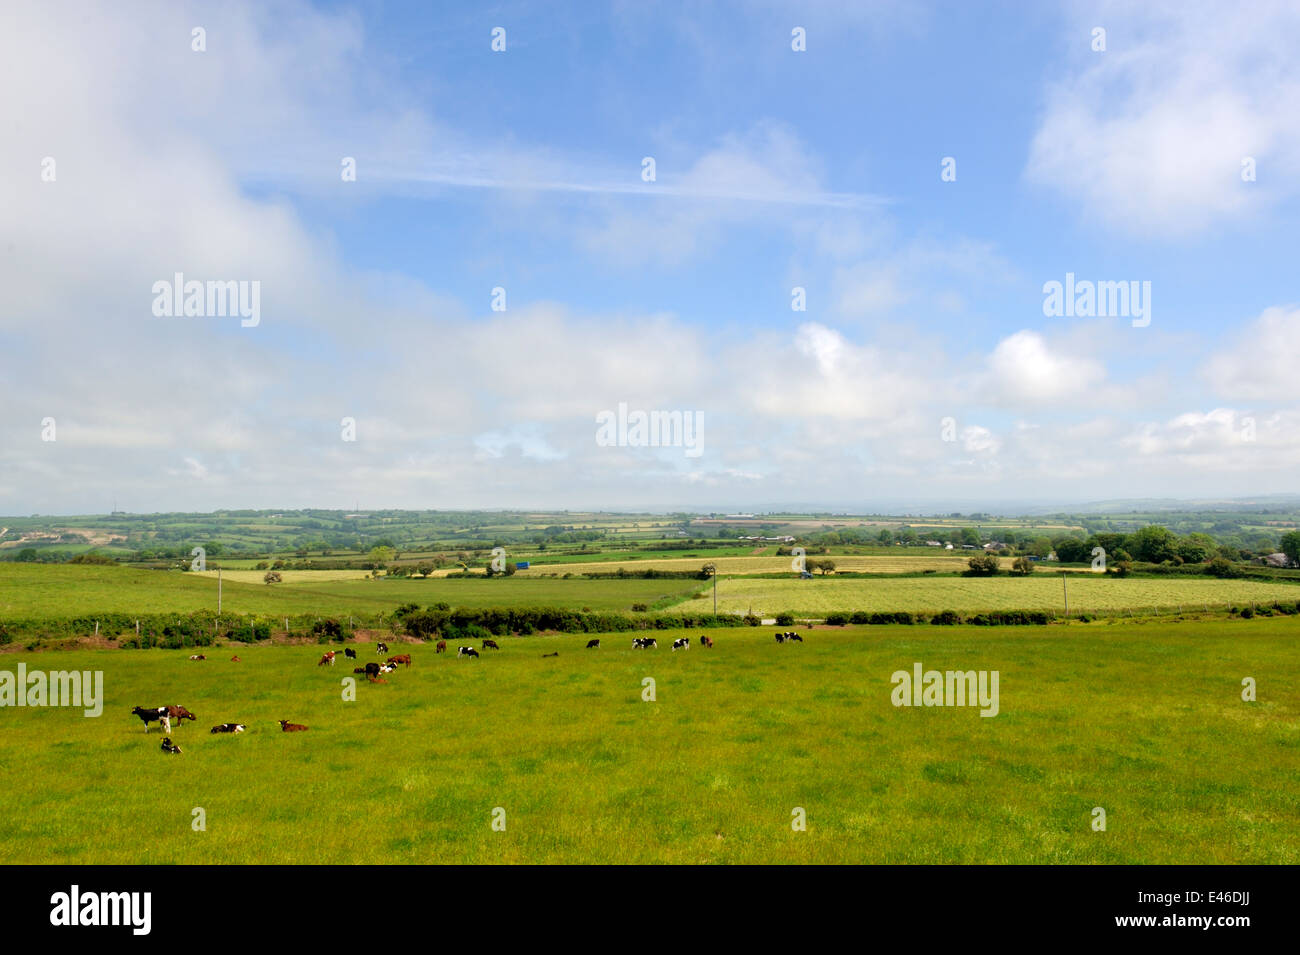 Farm field with dairy cattle grazing and view to patchwork of fields beyond, Penfeldr. Pembrokeshire, Wales, UK Stock Photo